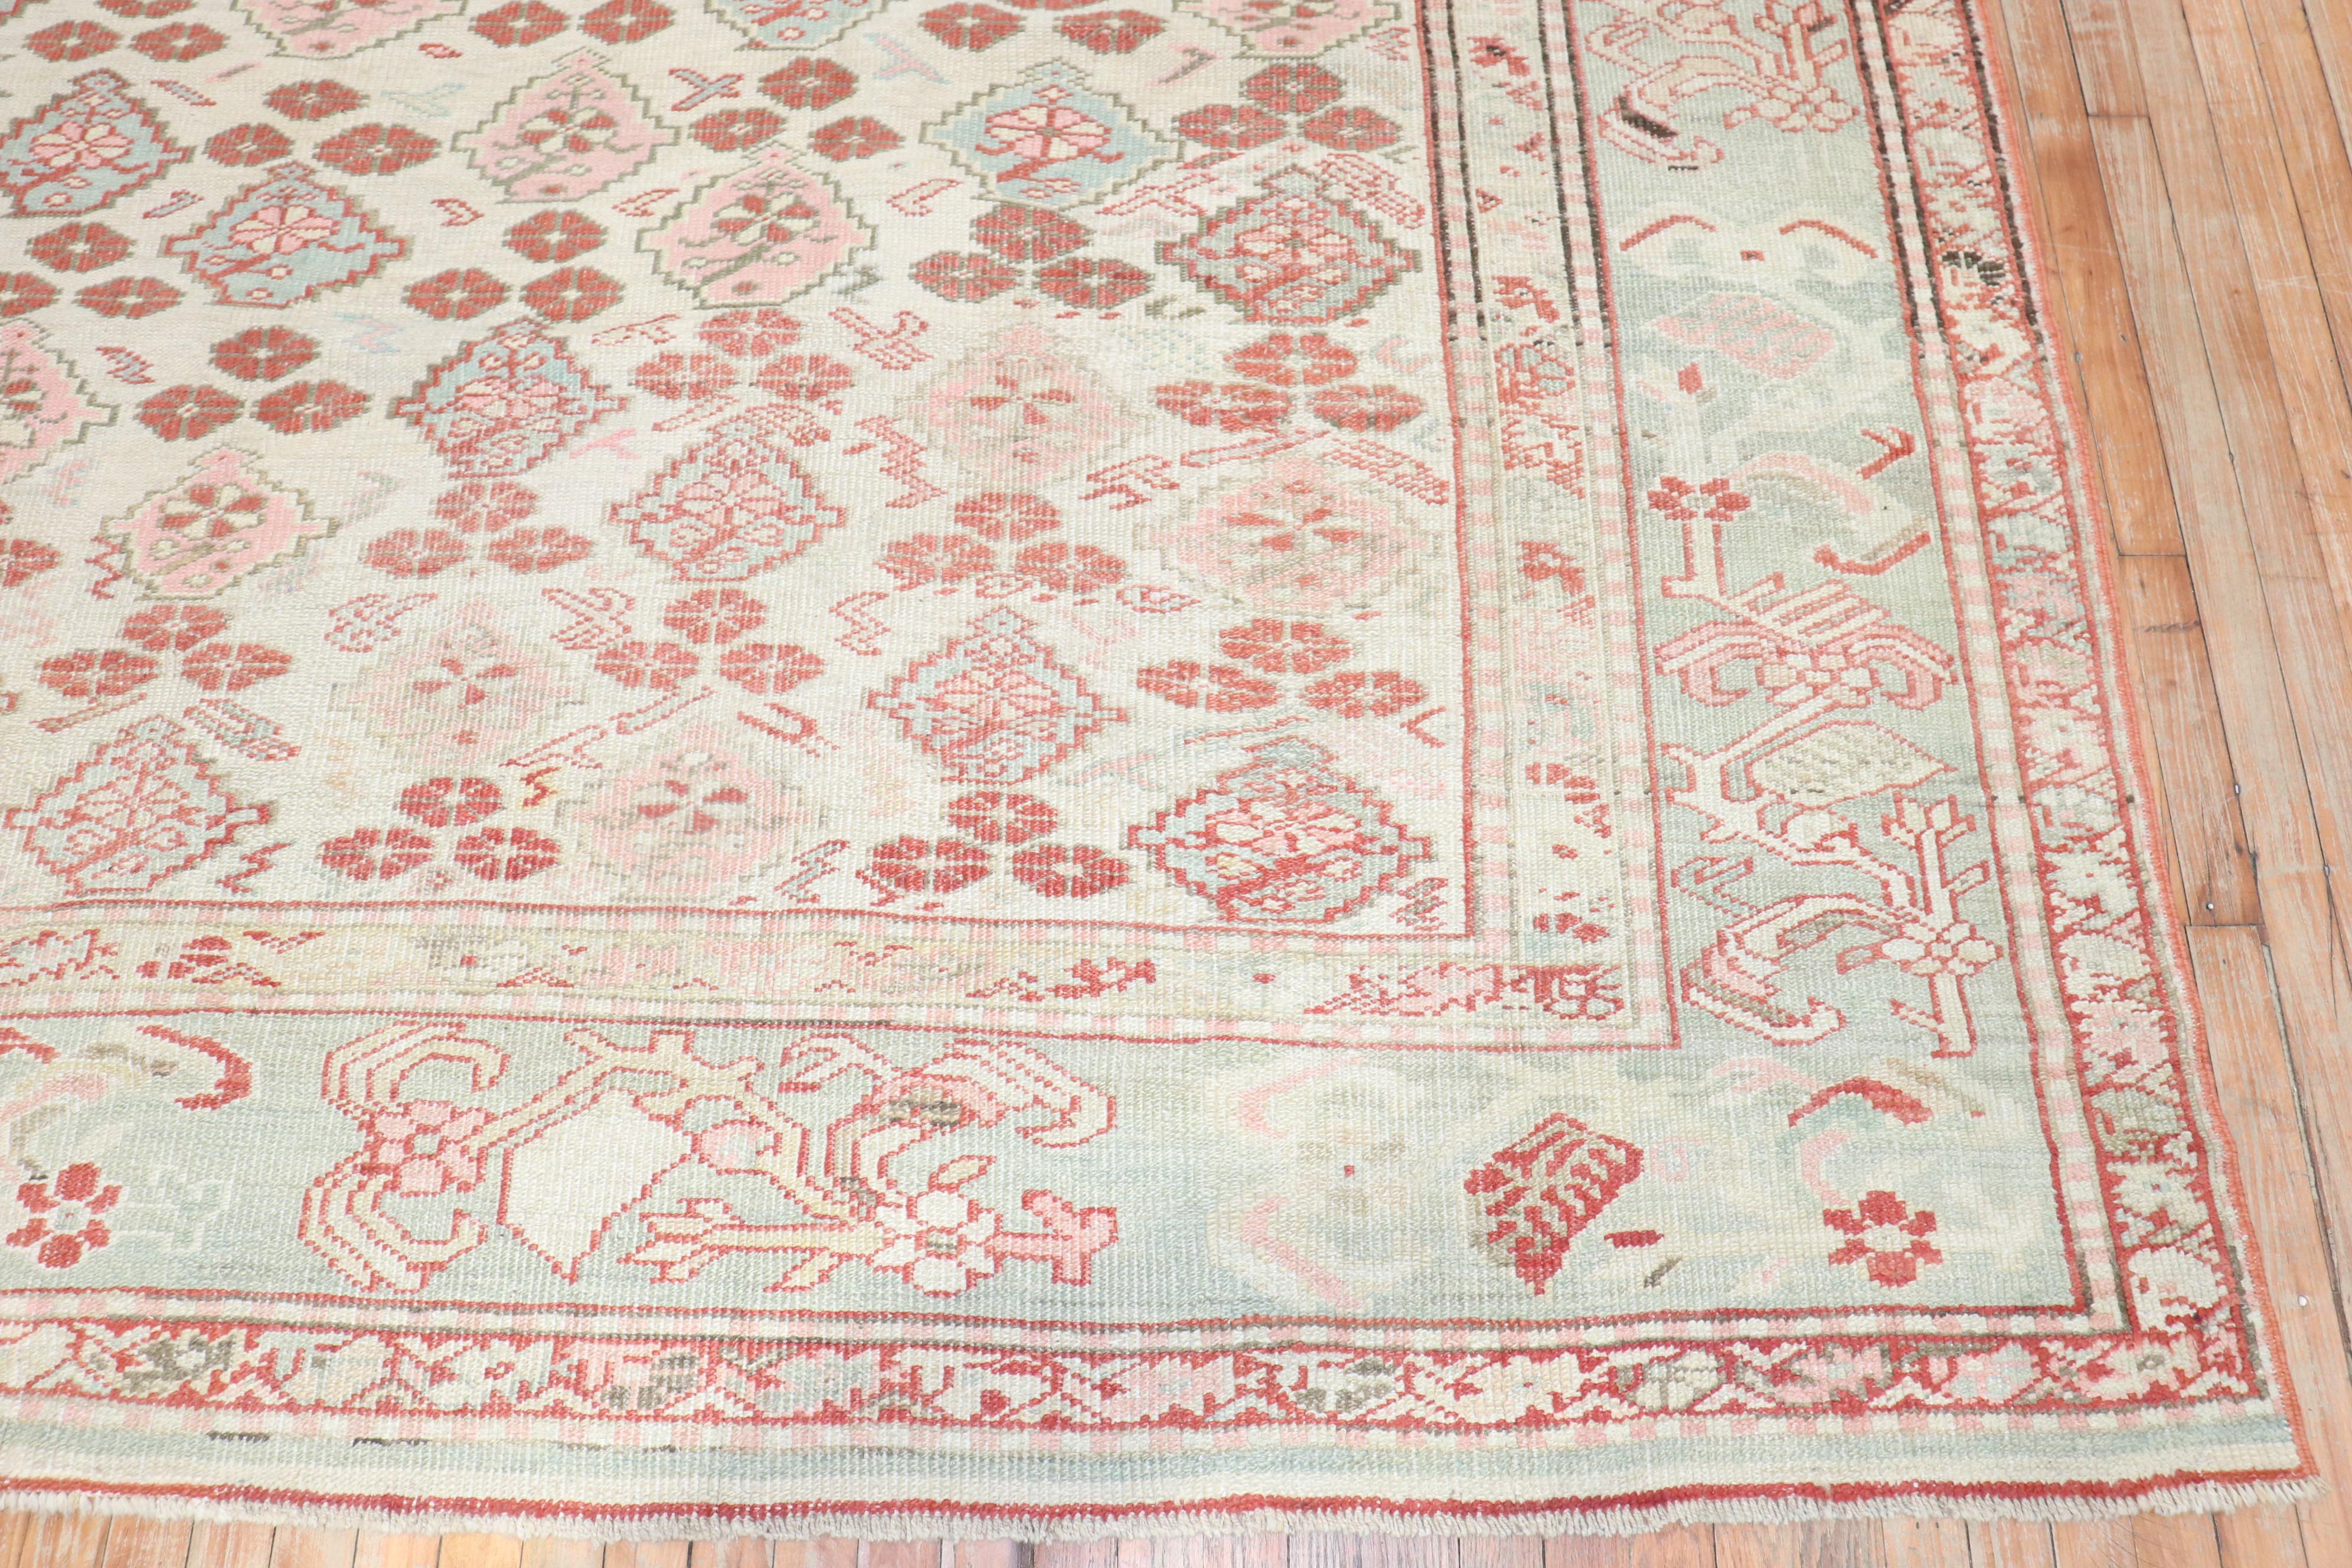 an early 20th century small room size Turkish Ghiordes decorative rug.

Measures: 10'3'' x 14'3''.